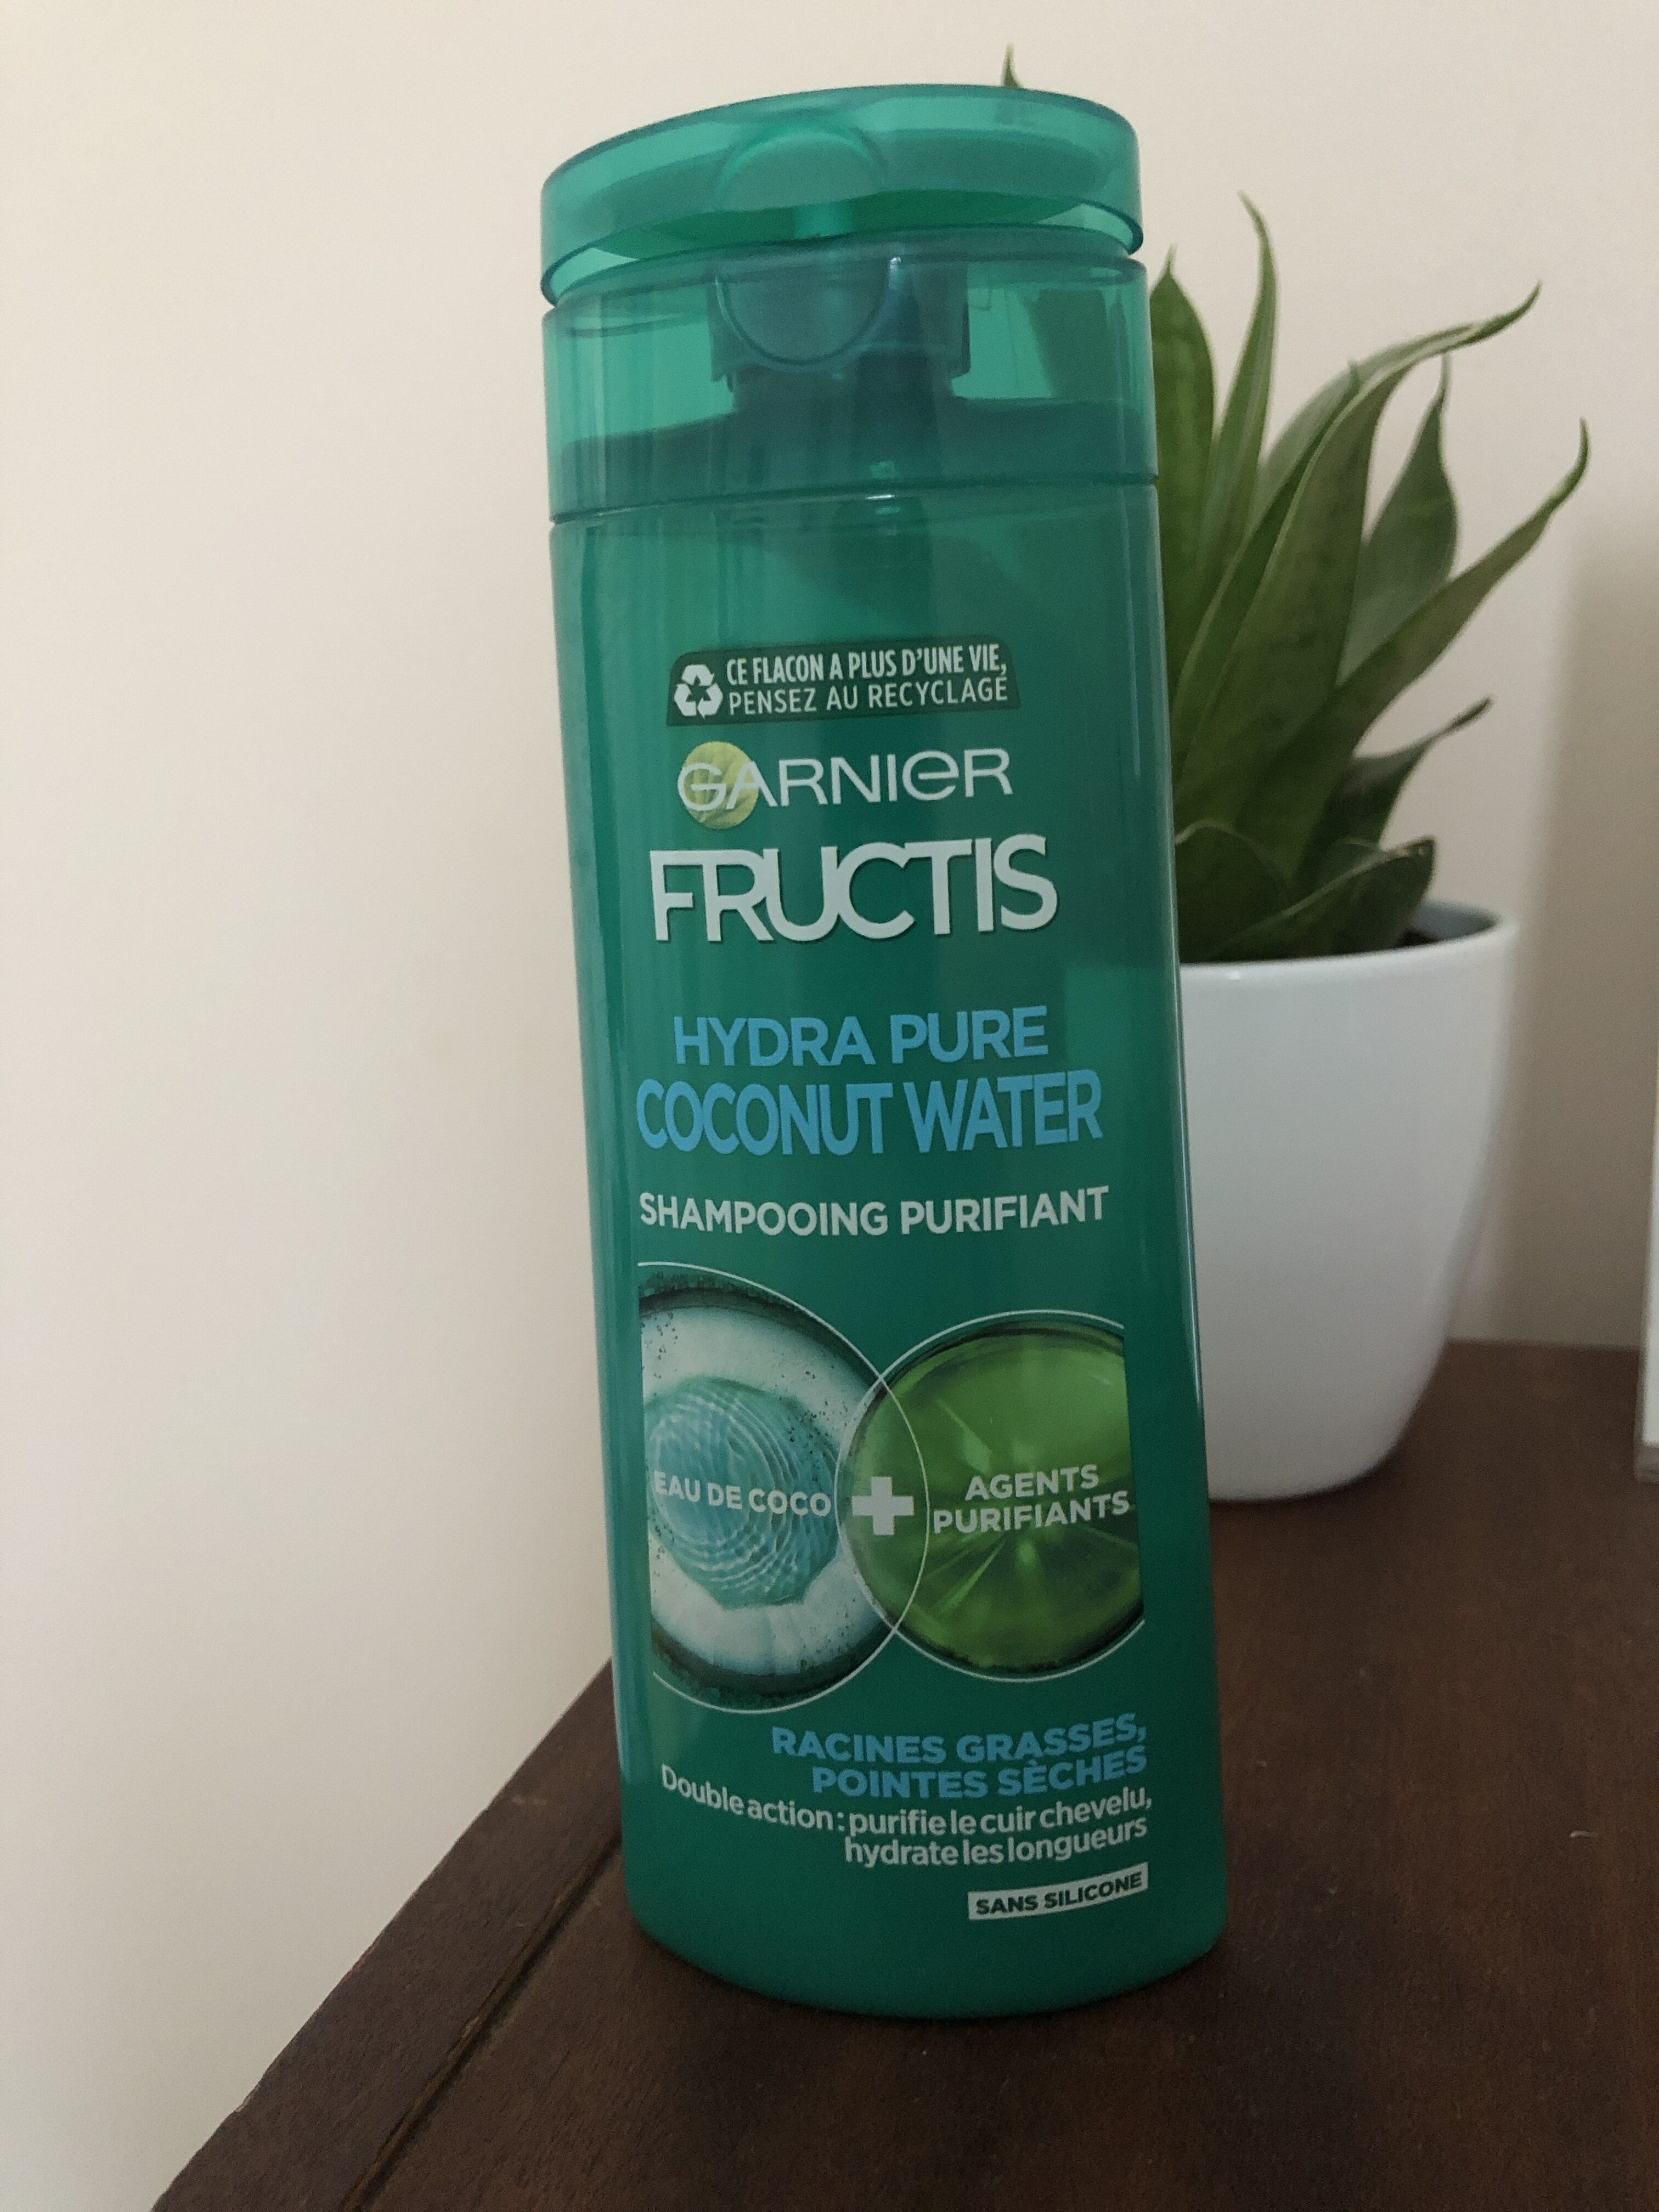 Fructis hydra pure coconut water - Product - fr